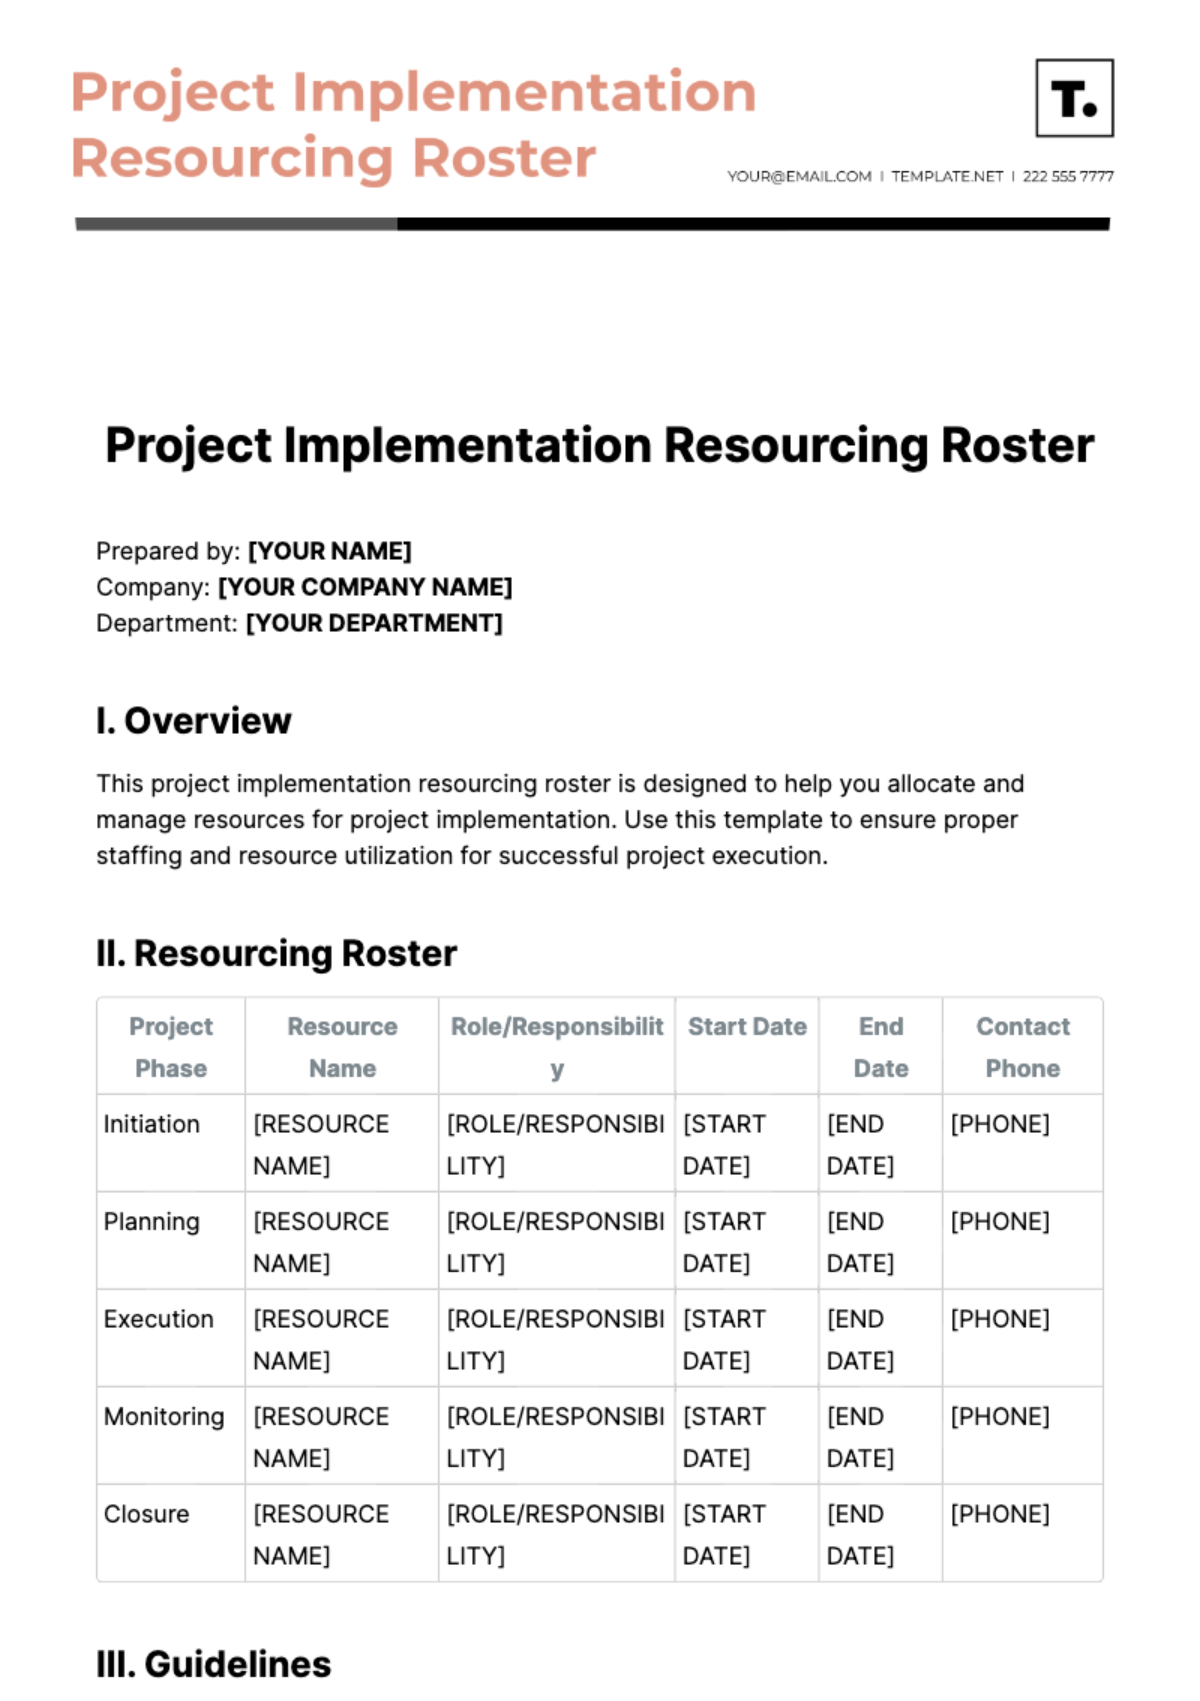 Project Implementation Resourcing Roster Template